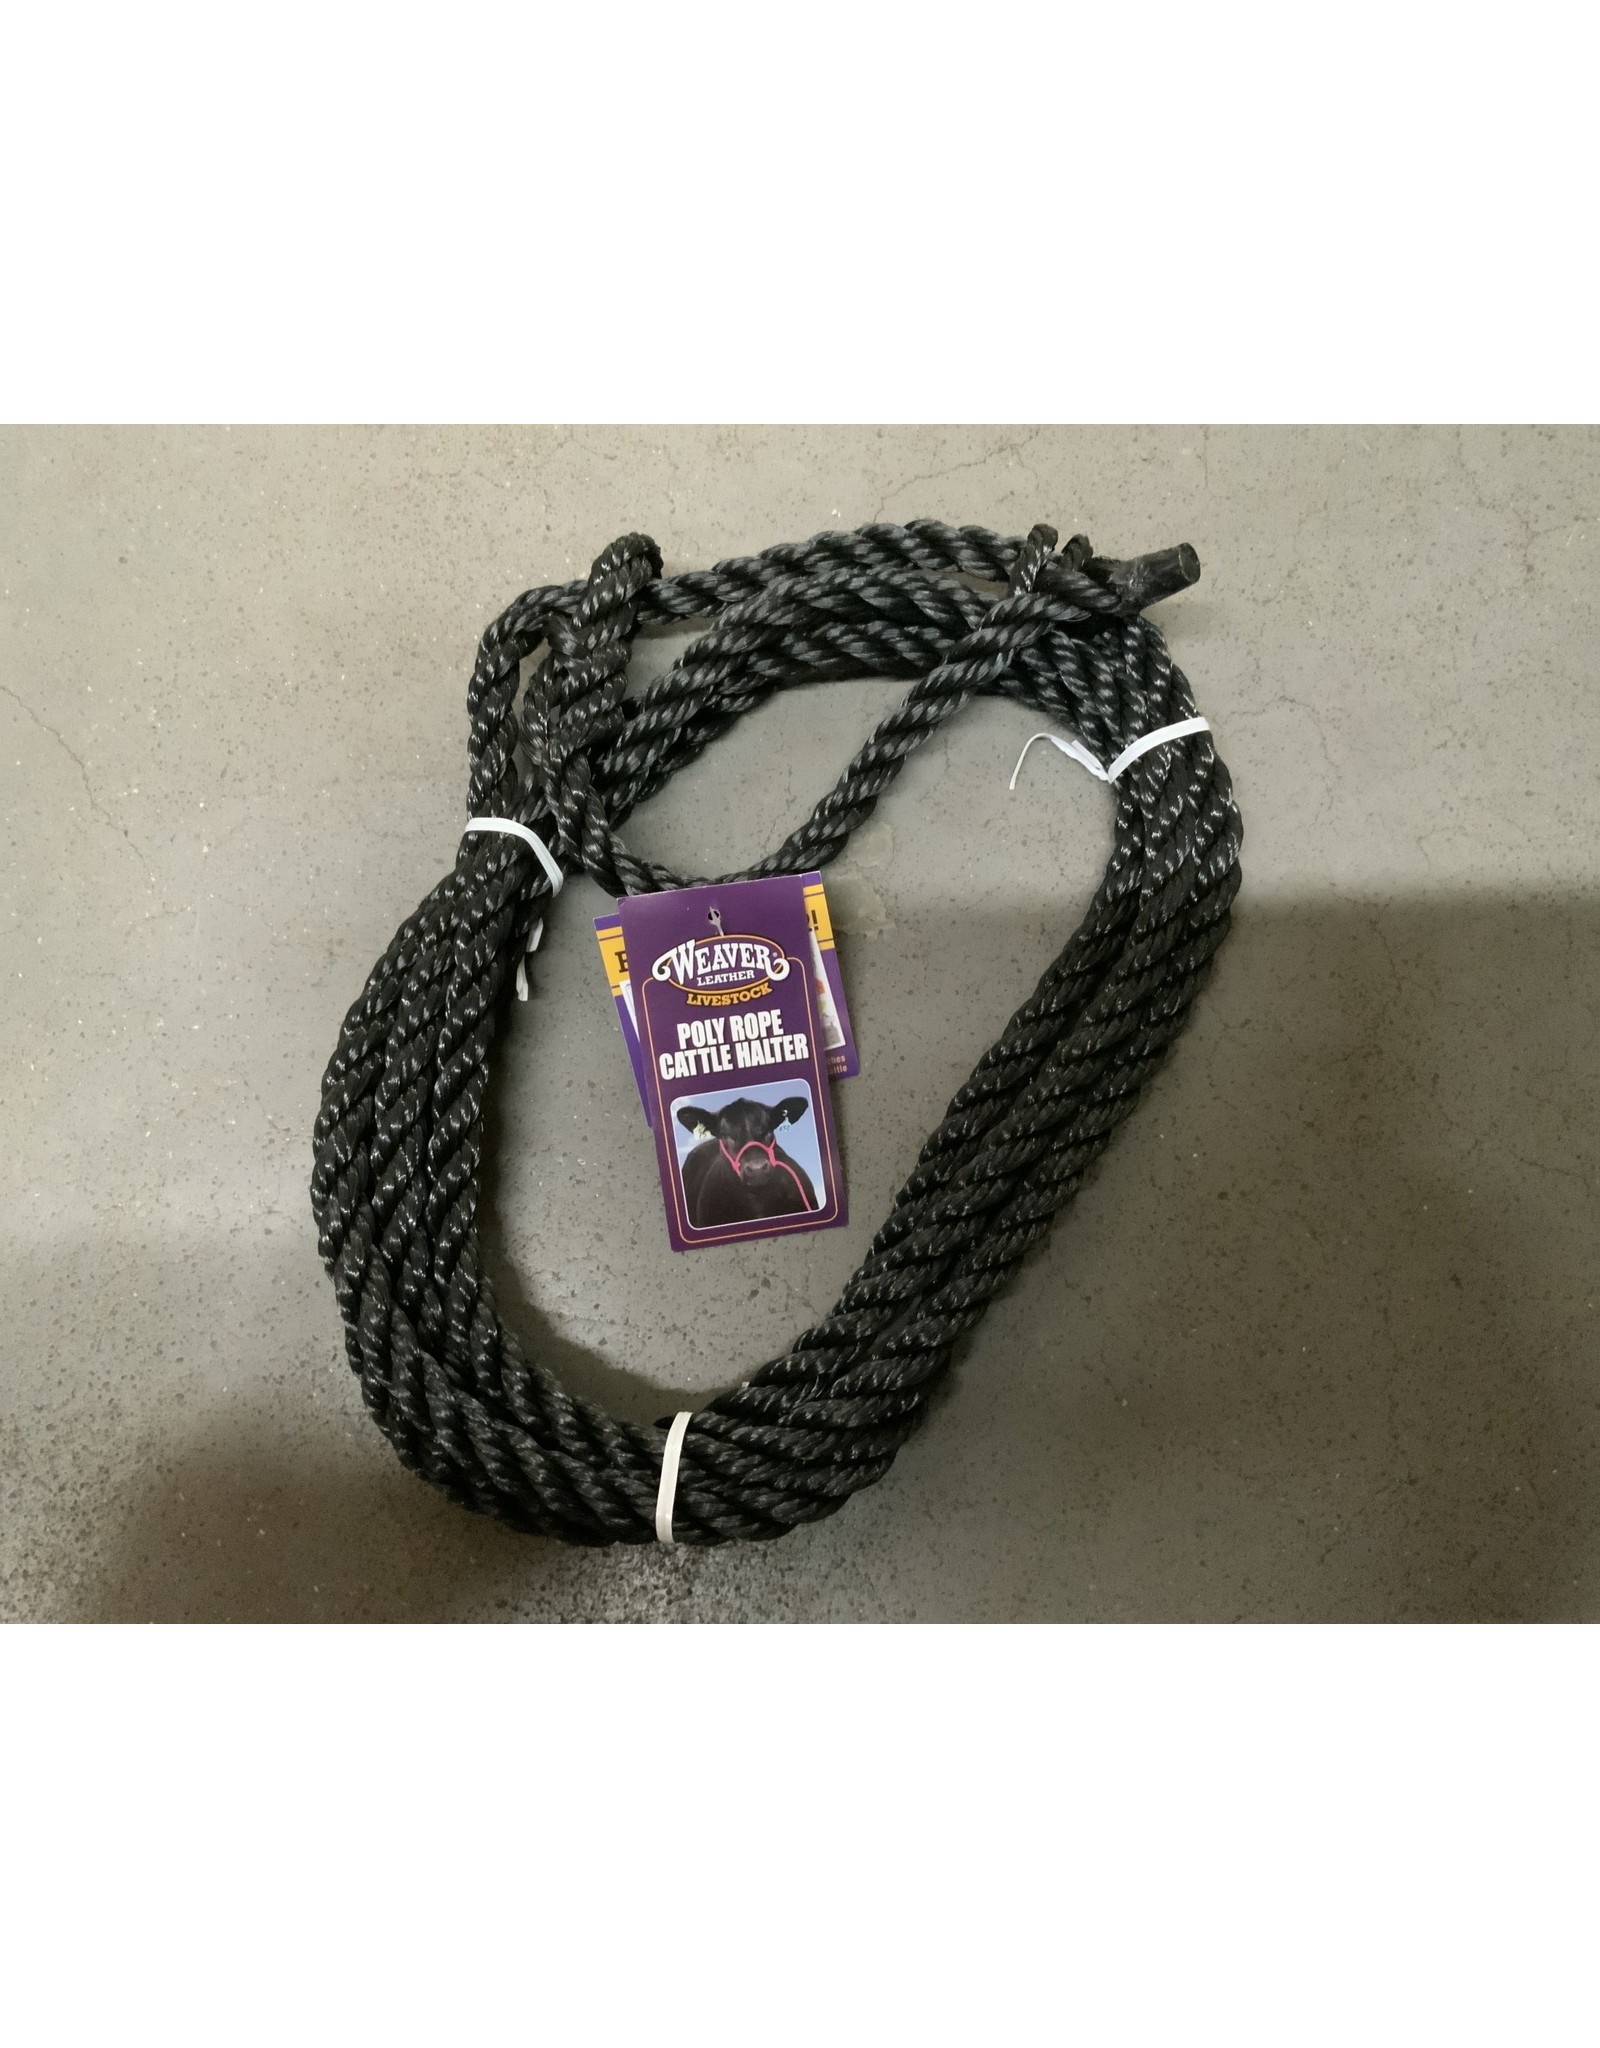 Cow Halter - Poly Rope Cattle Halter - Black - 35-7900-BK (Box of 26 of various colors - #93-2003)